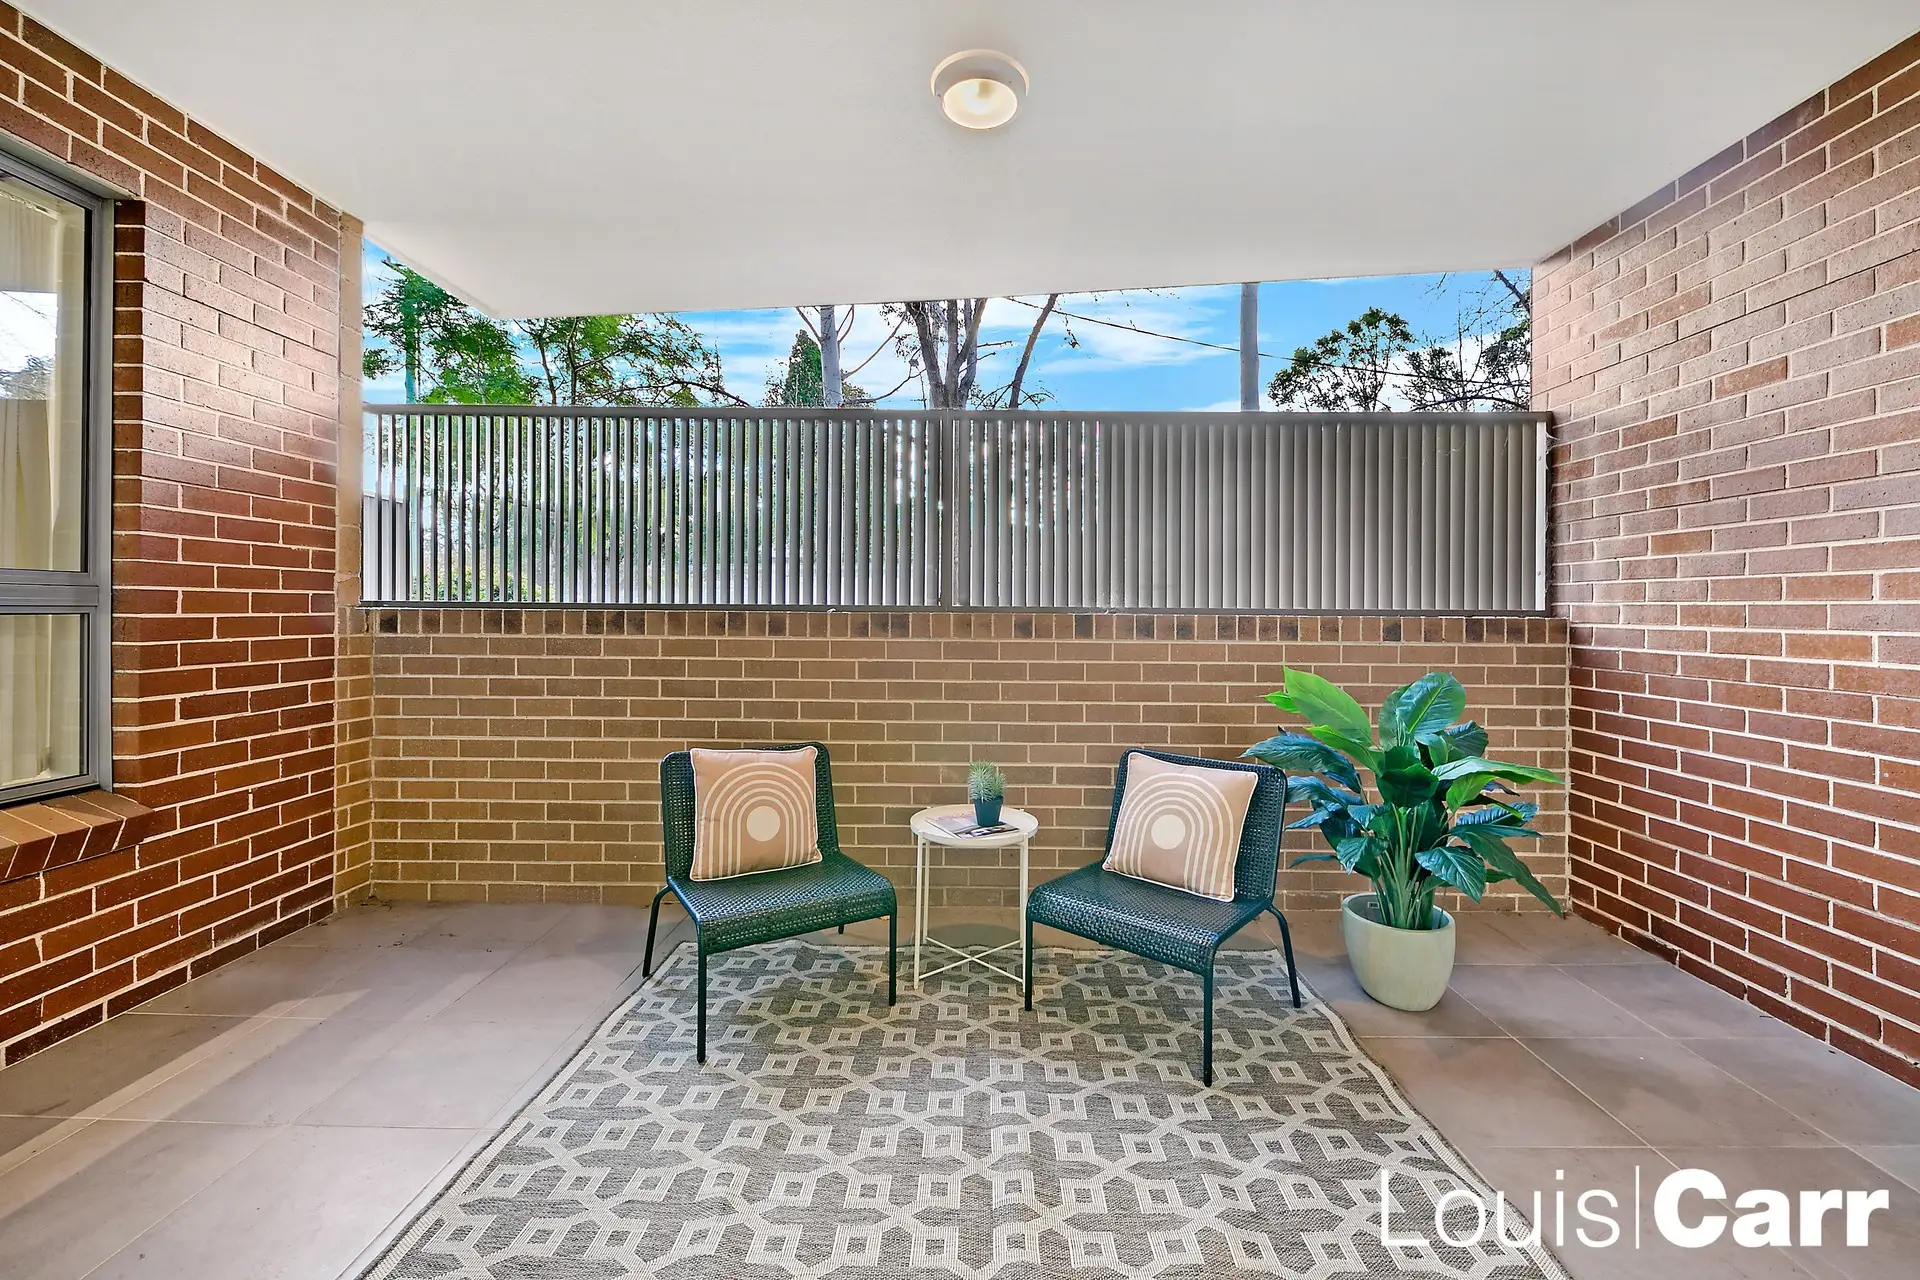 Photo #9: 68/31-39 Sherwin Avenue, Castle Hill - Sold by Louis Carr Real Estate